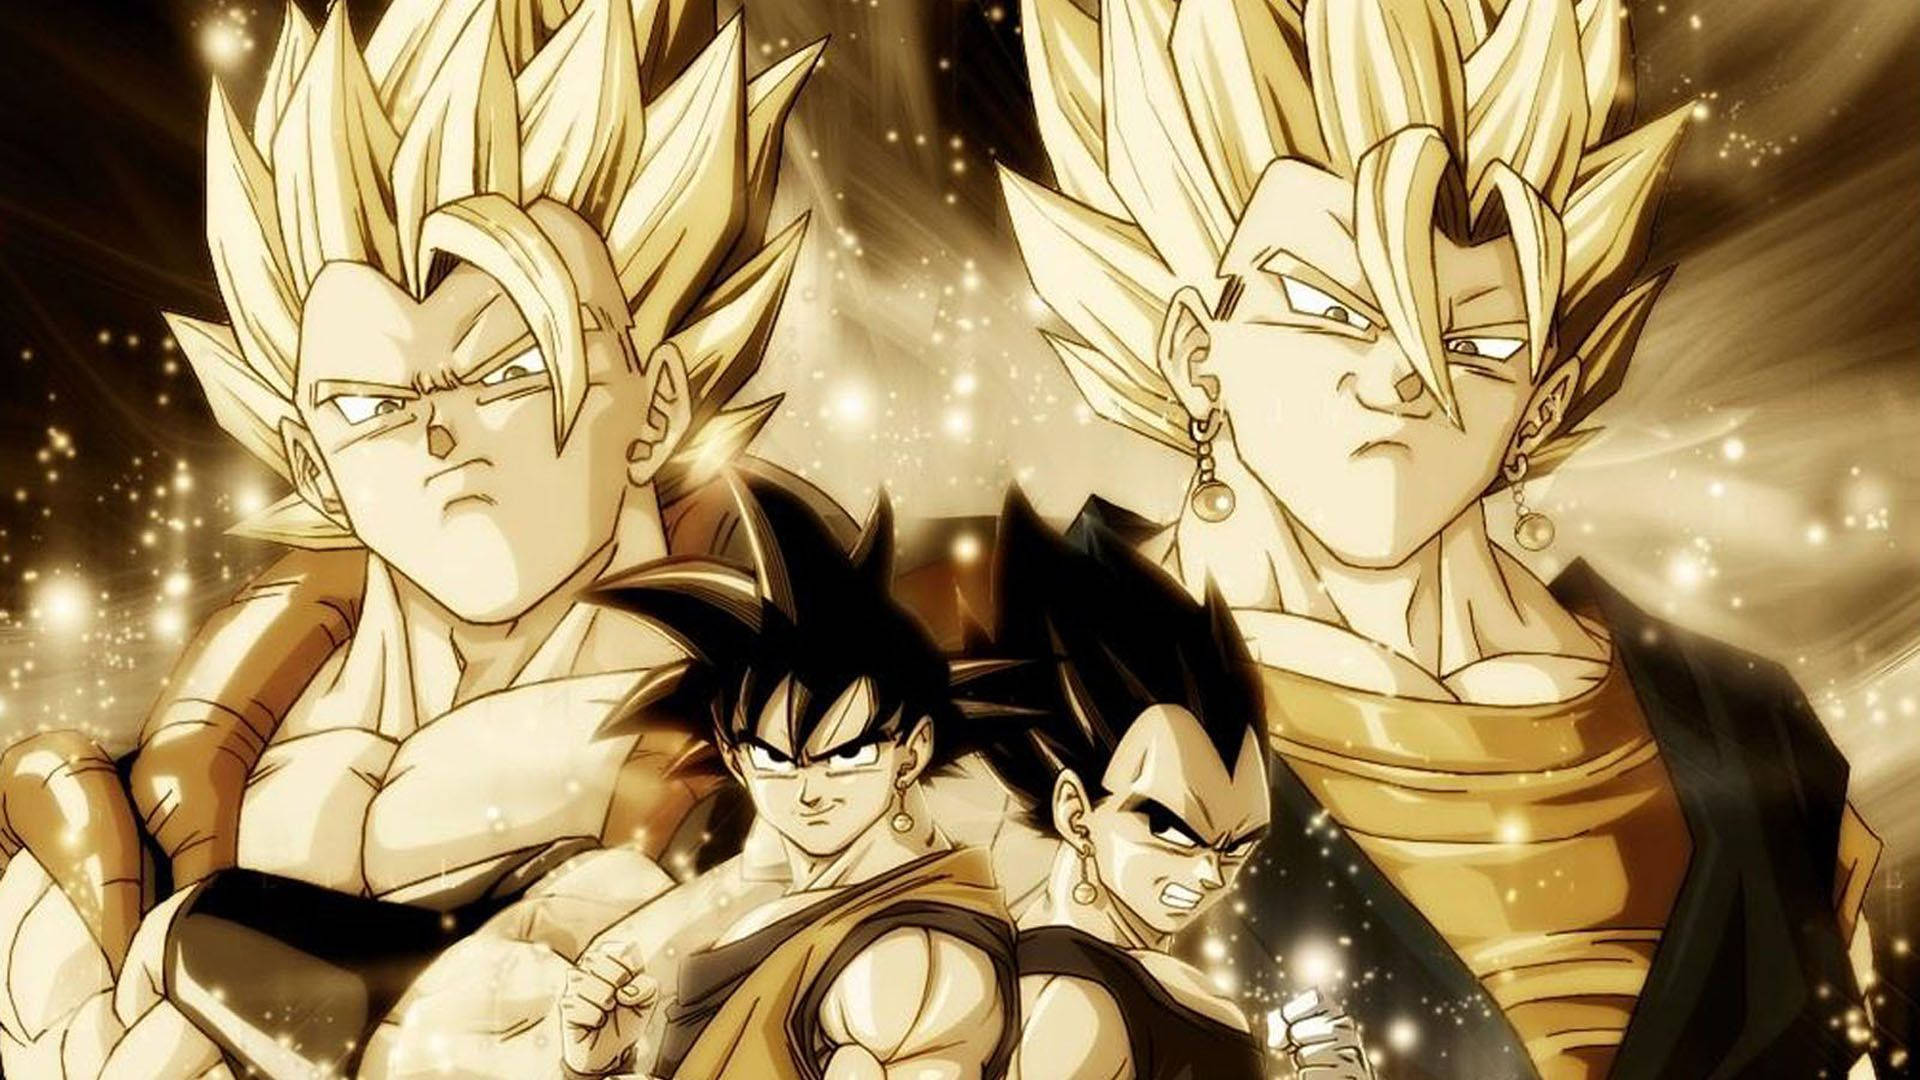 Enjoy the Retro Radiance of this HD Vintage DBZ Cover Wallpaper